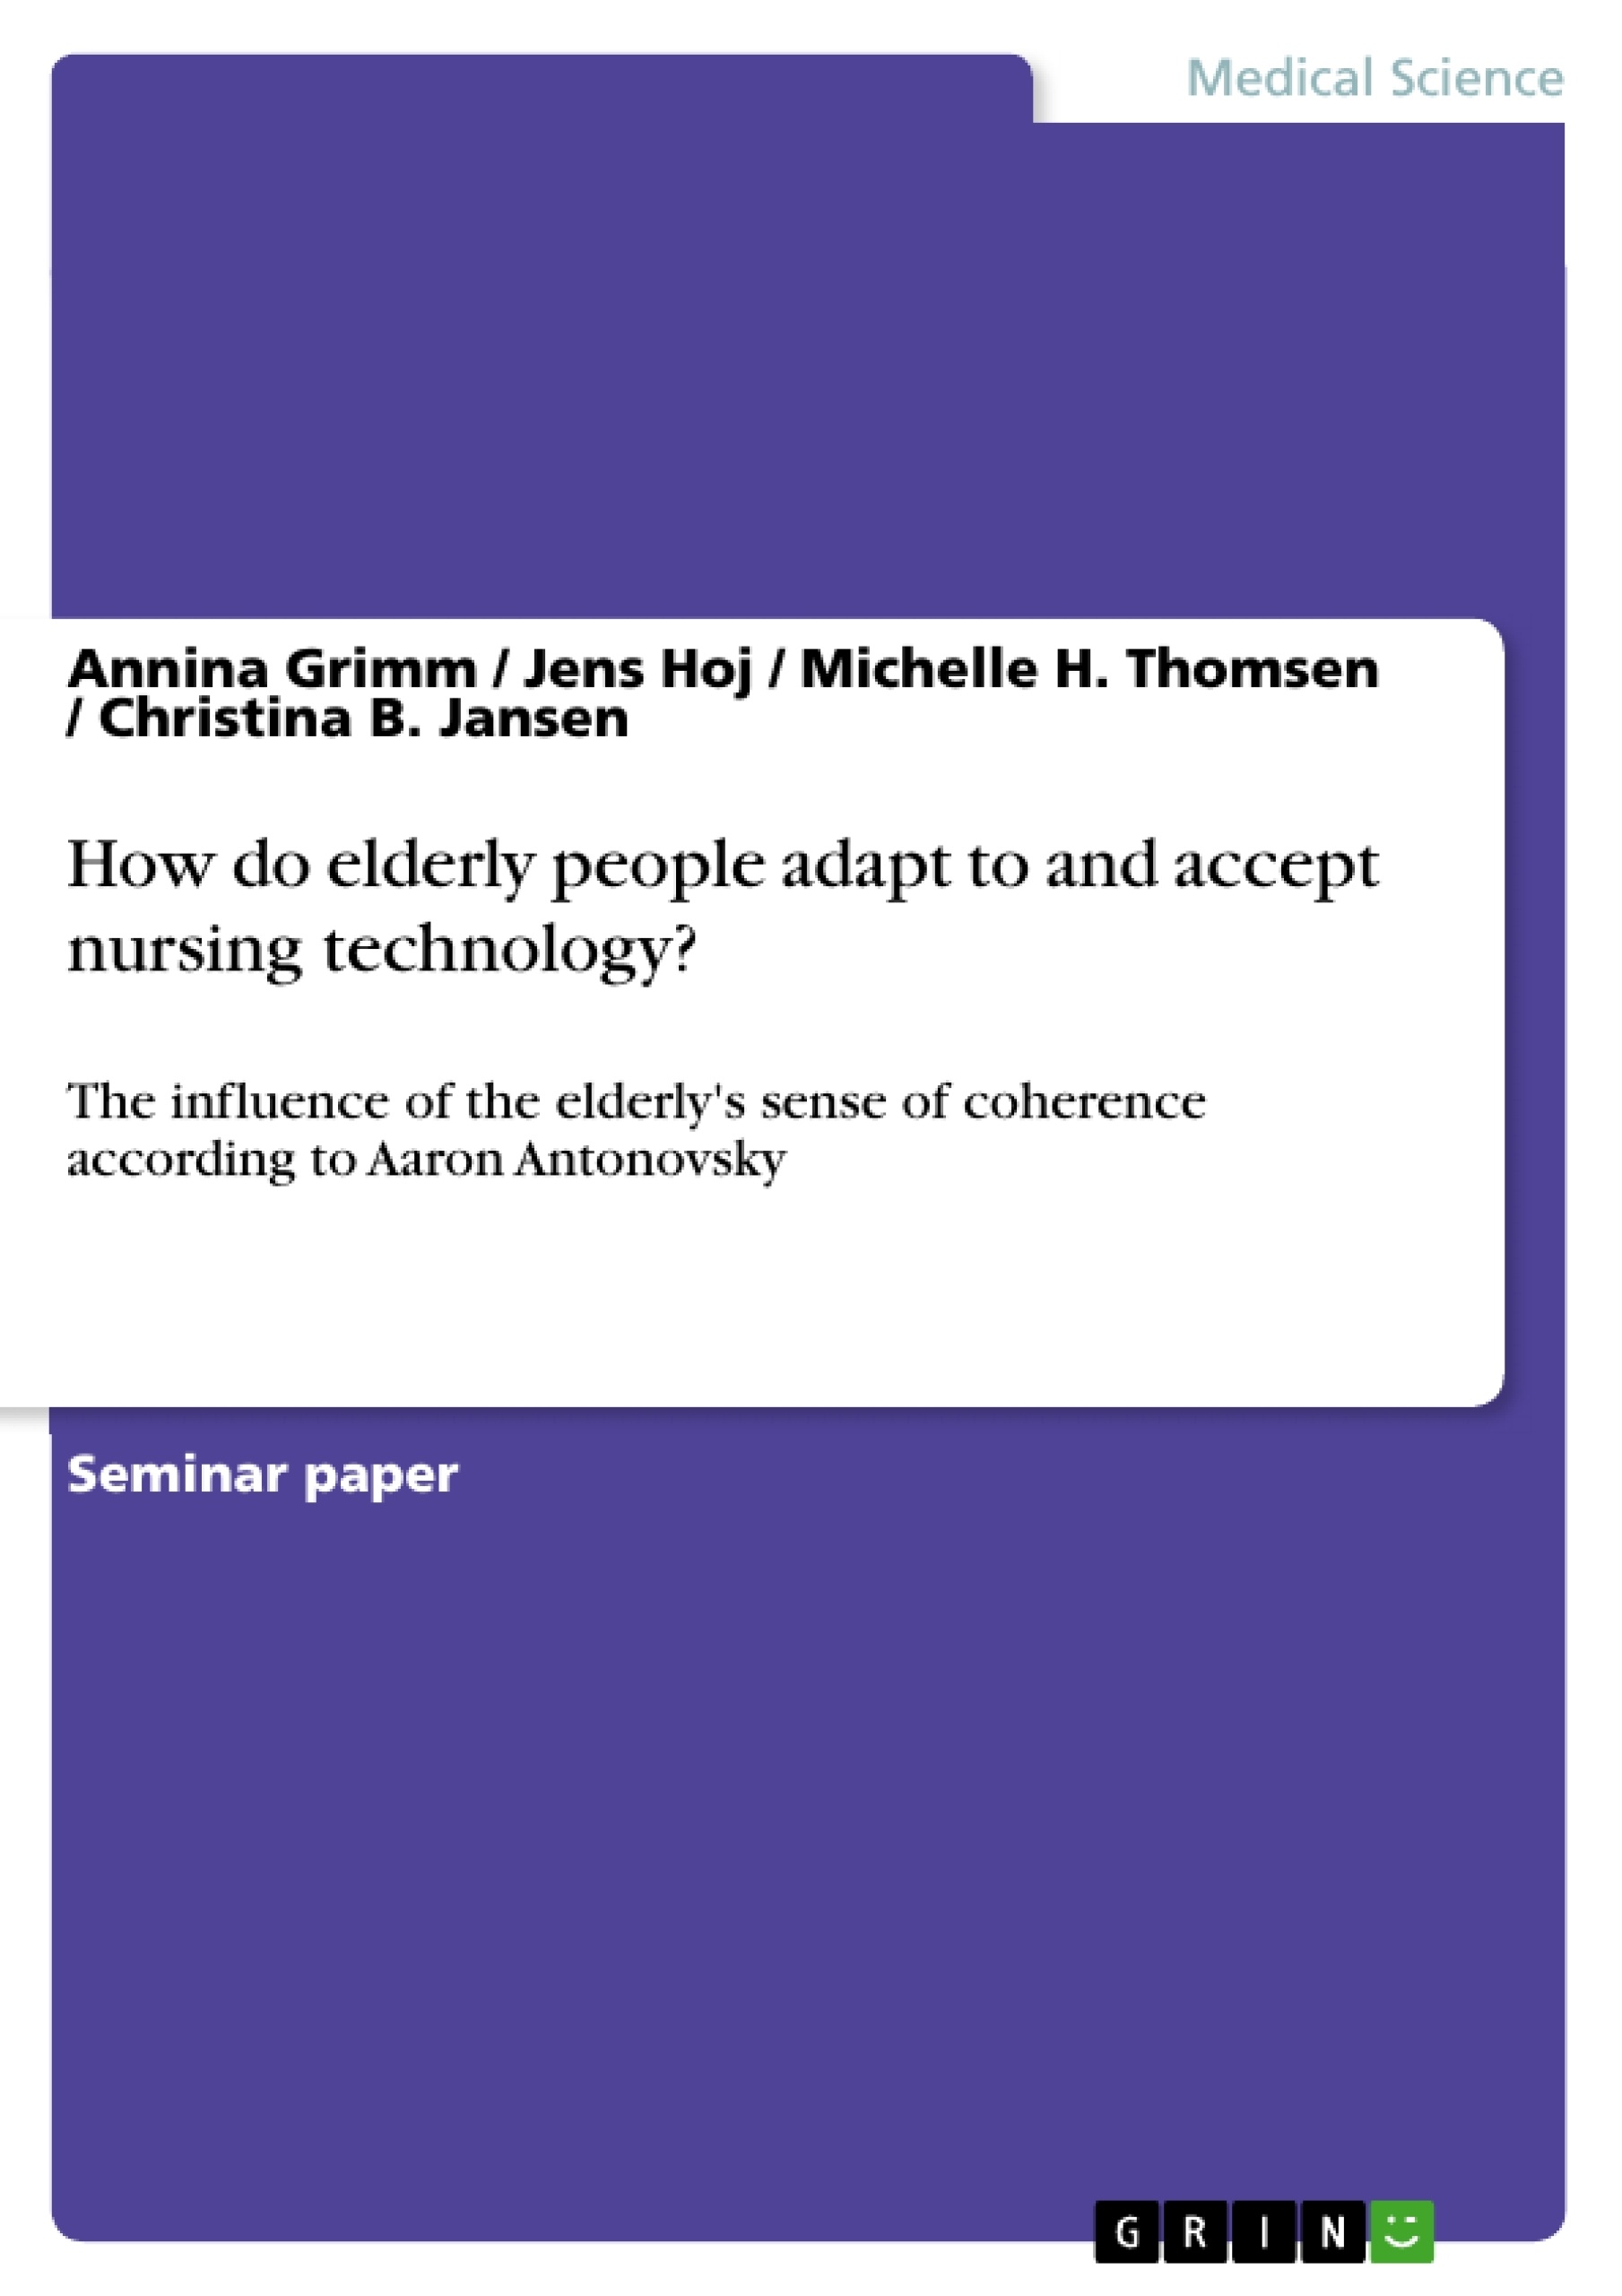 Title: How do elderly people adapt to and accept nursing technology?